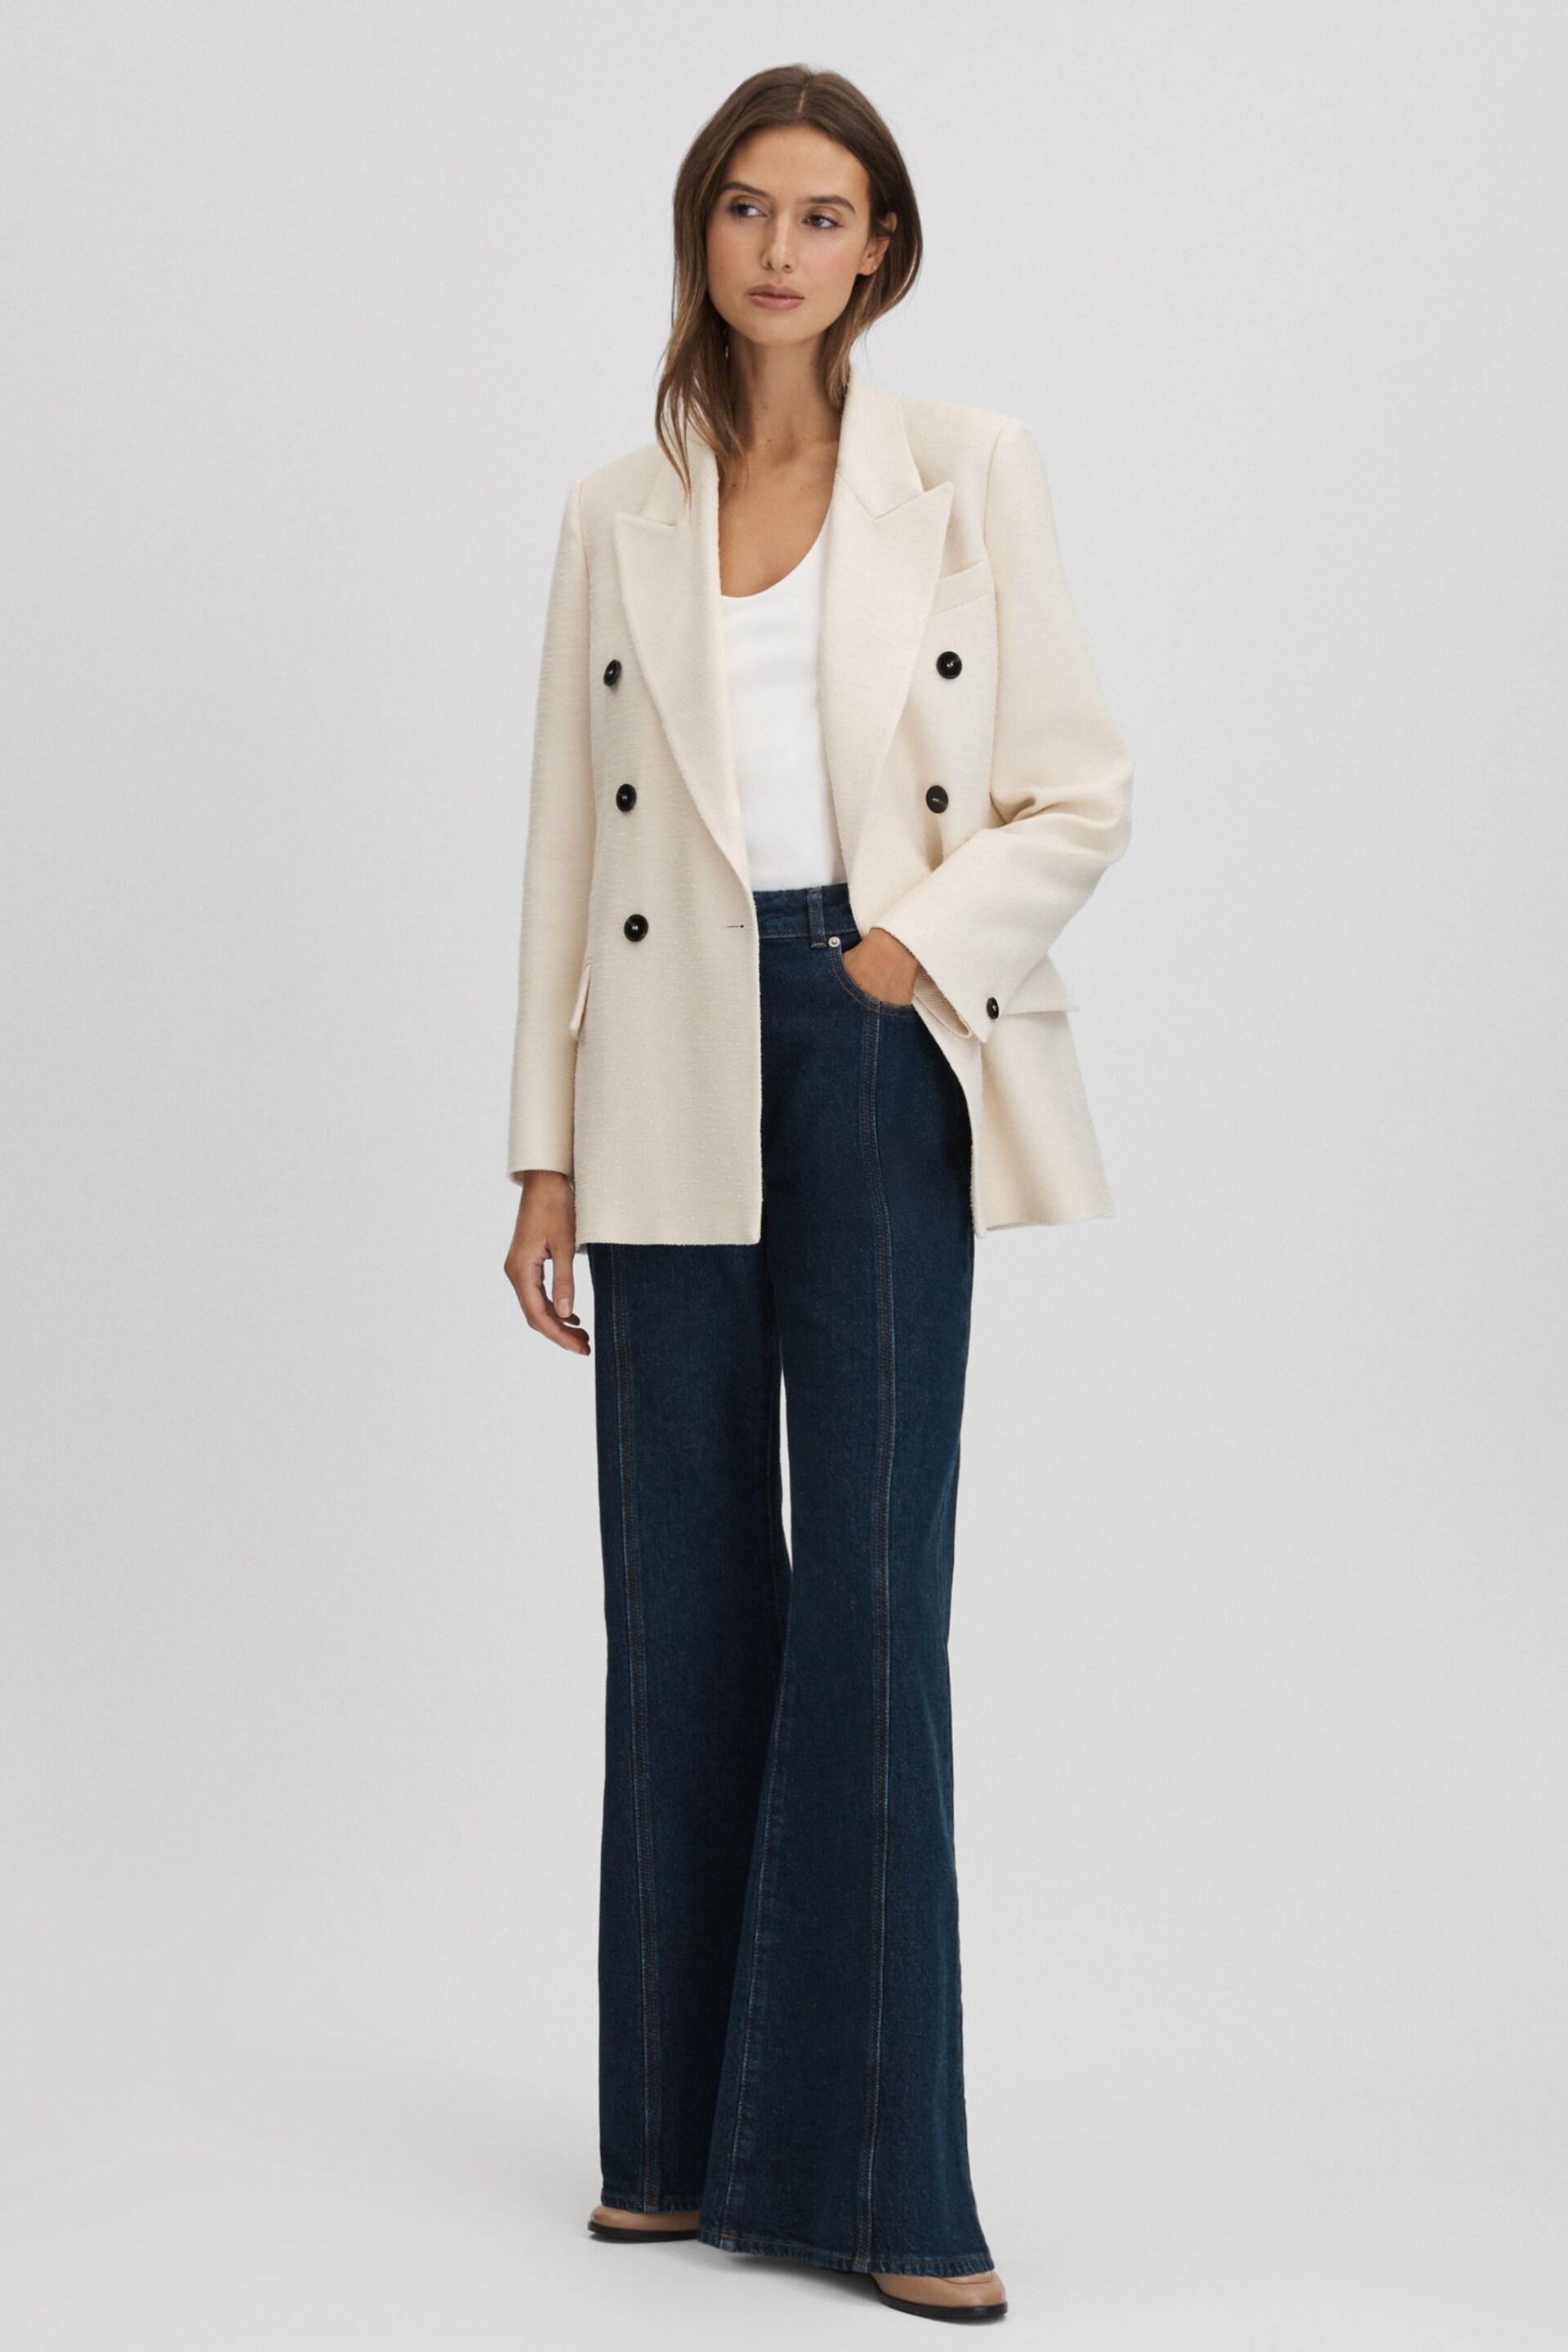 Reiss White Bronte Textured Double Breasted Blazer - Image 1 of 6